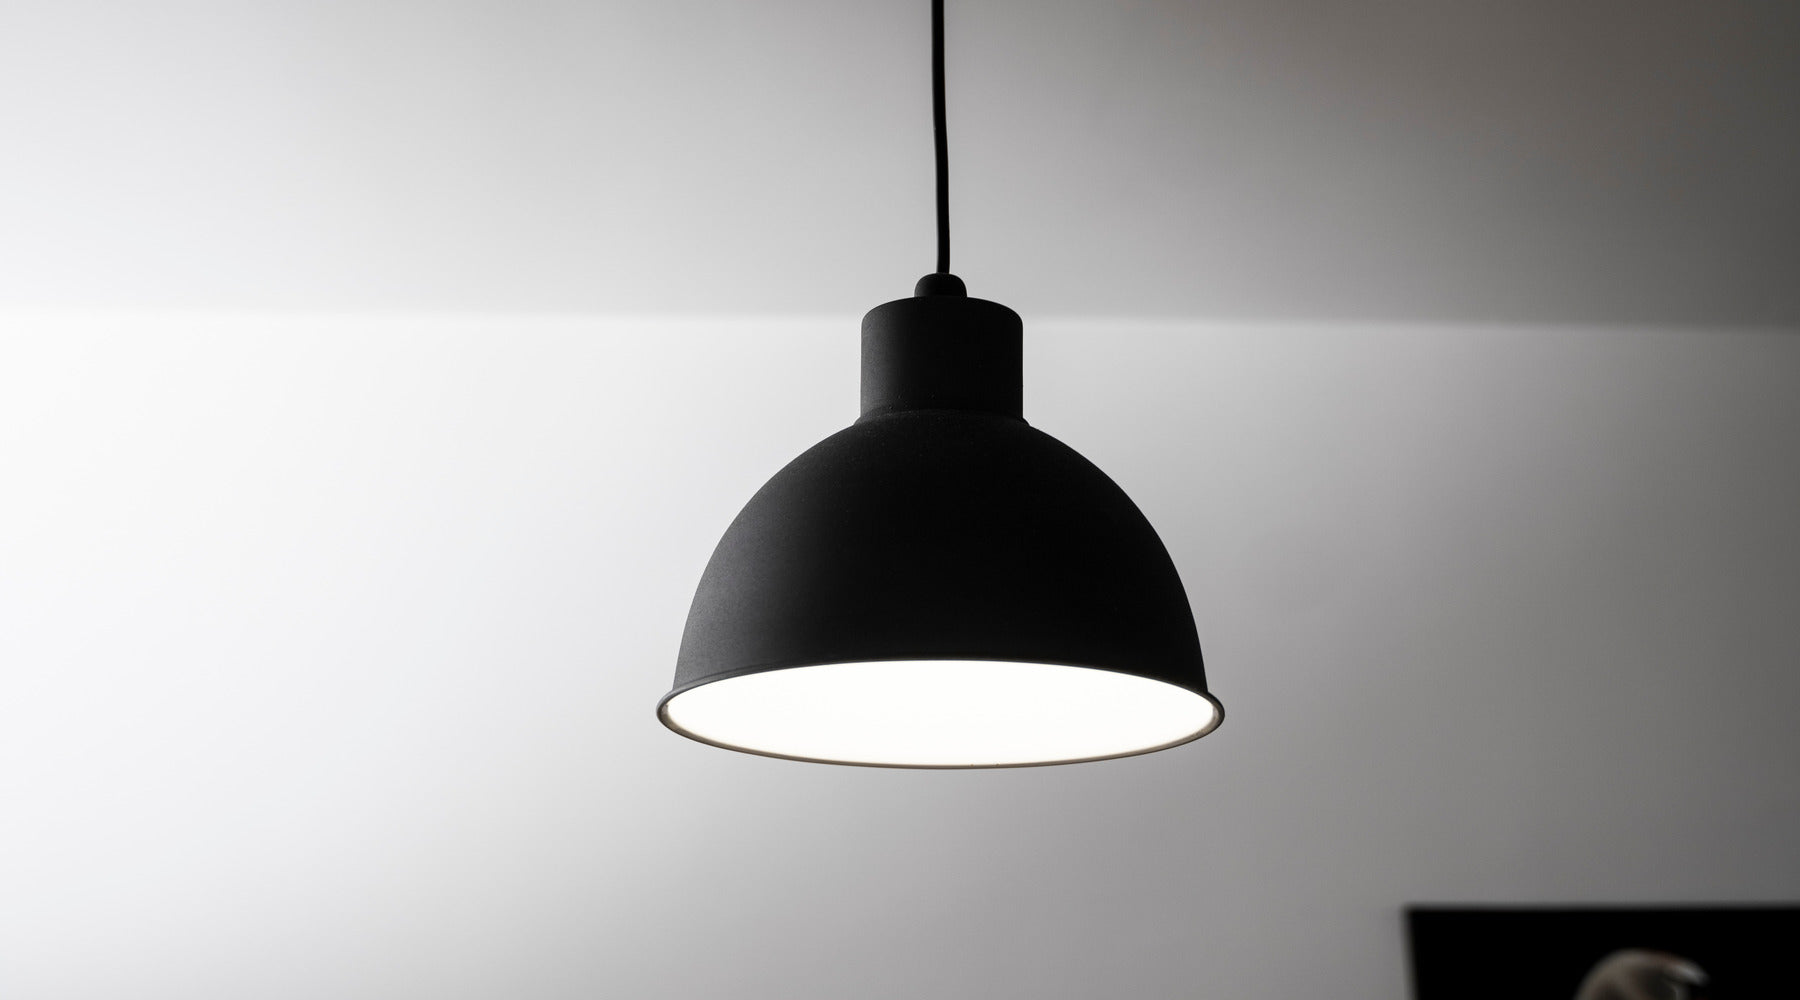 A21 LED bulb used in black pendant light located in modern kitchen